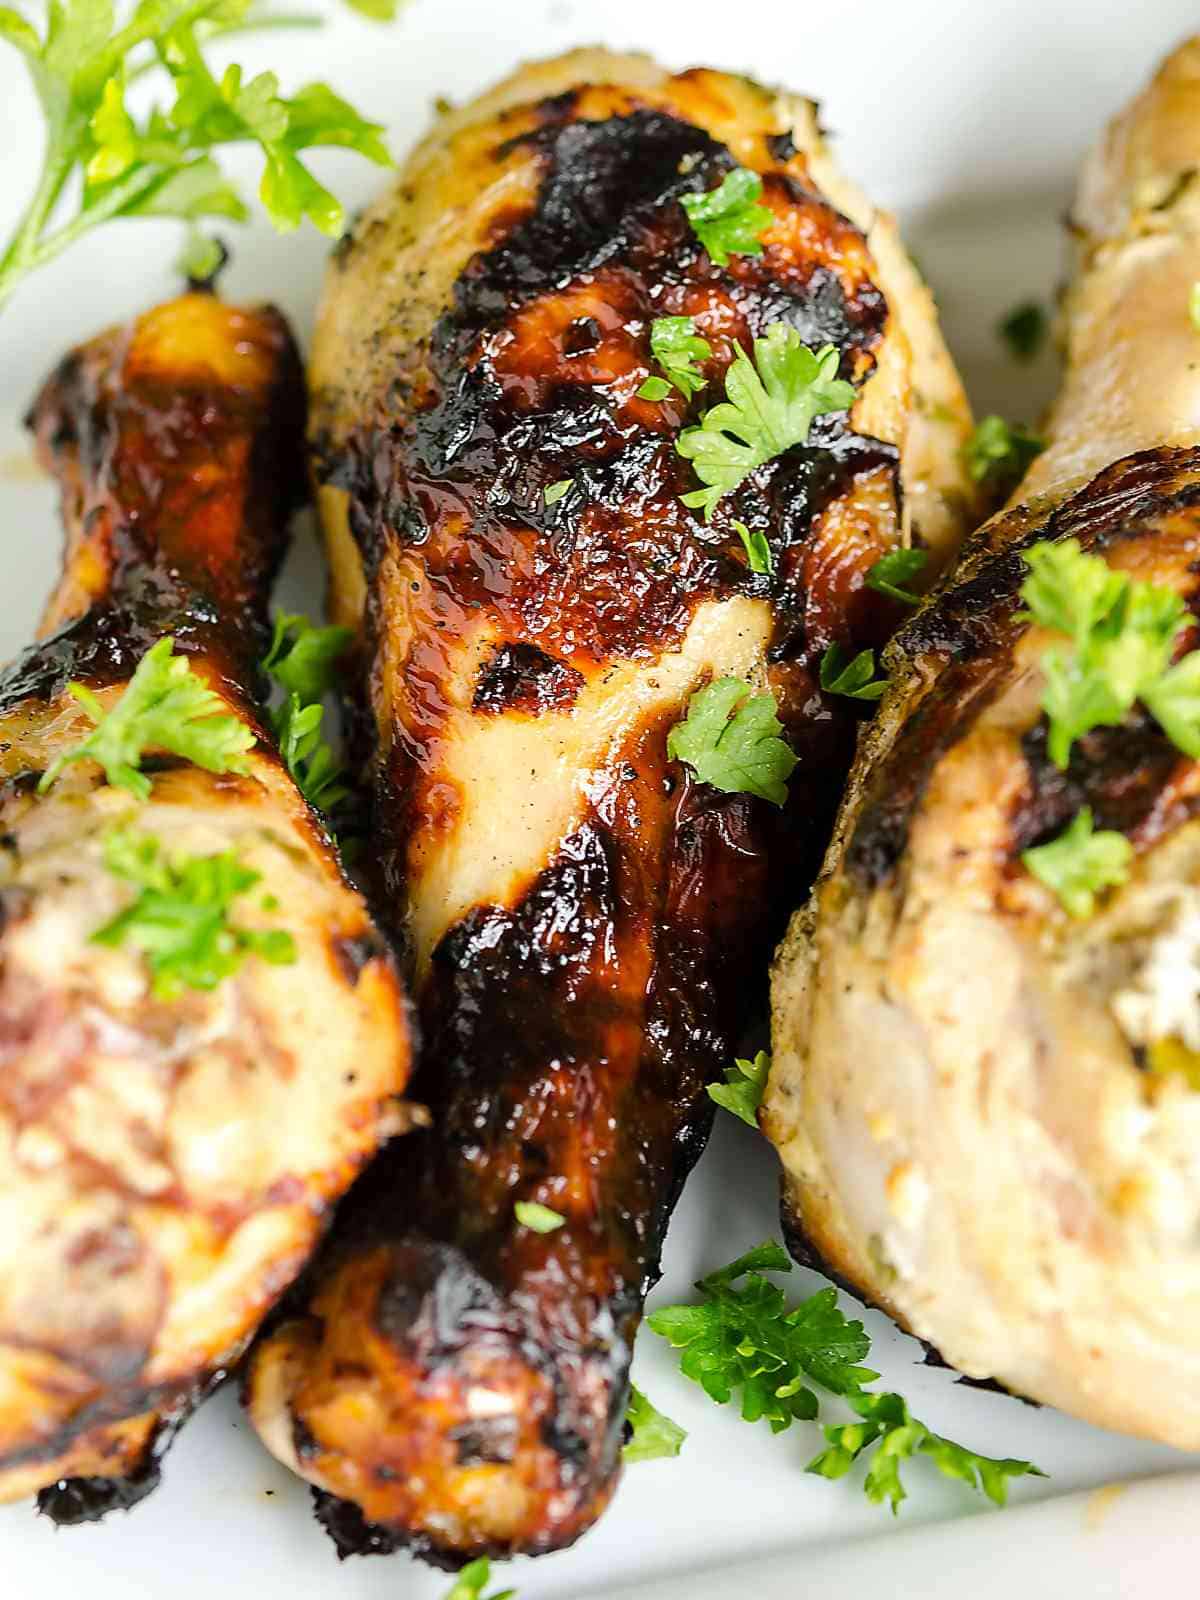 grilled chicken legs glistening in sauce, nicely charred from the grill.